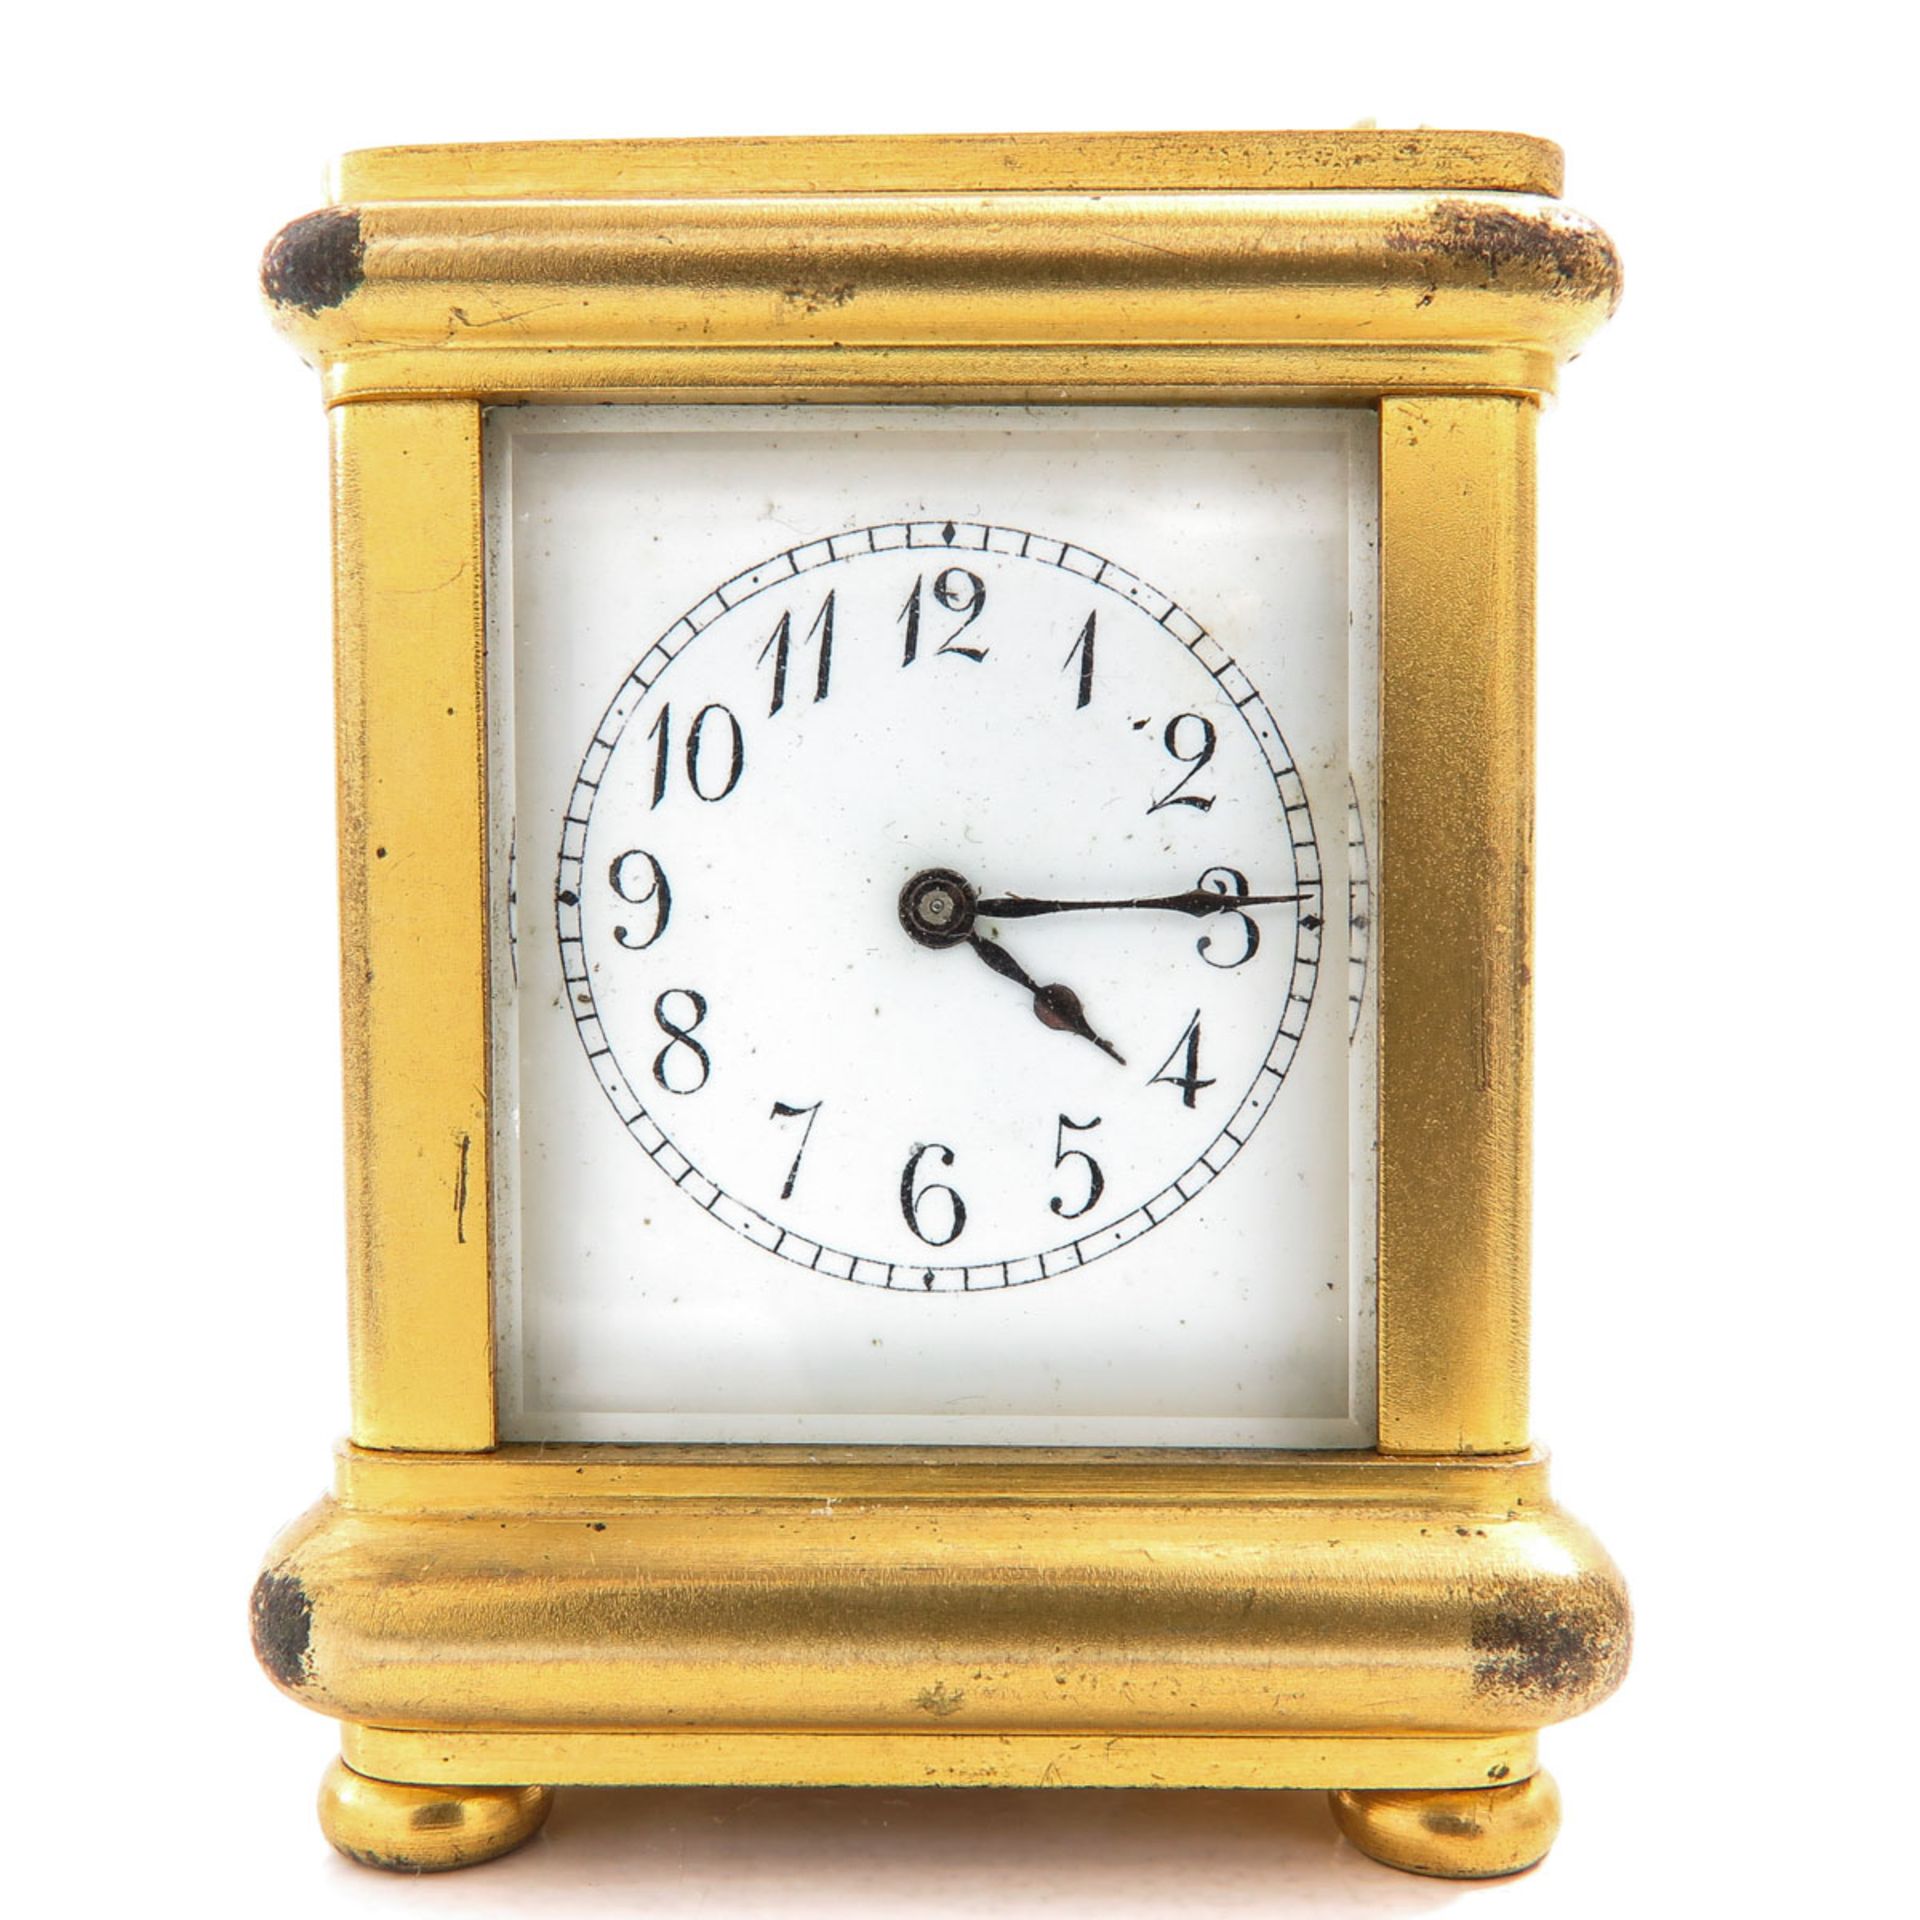 A Le Roy & Fils Carriage Clock - Image 6 of 8